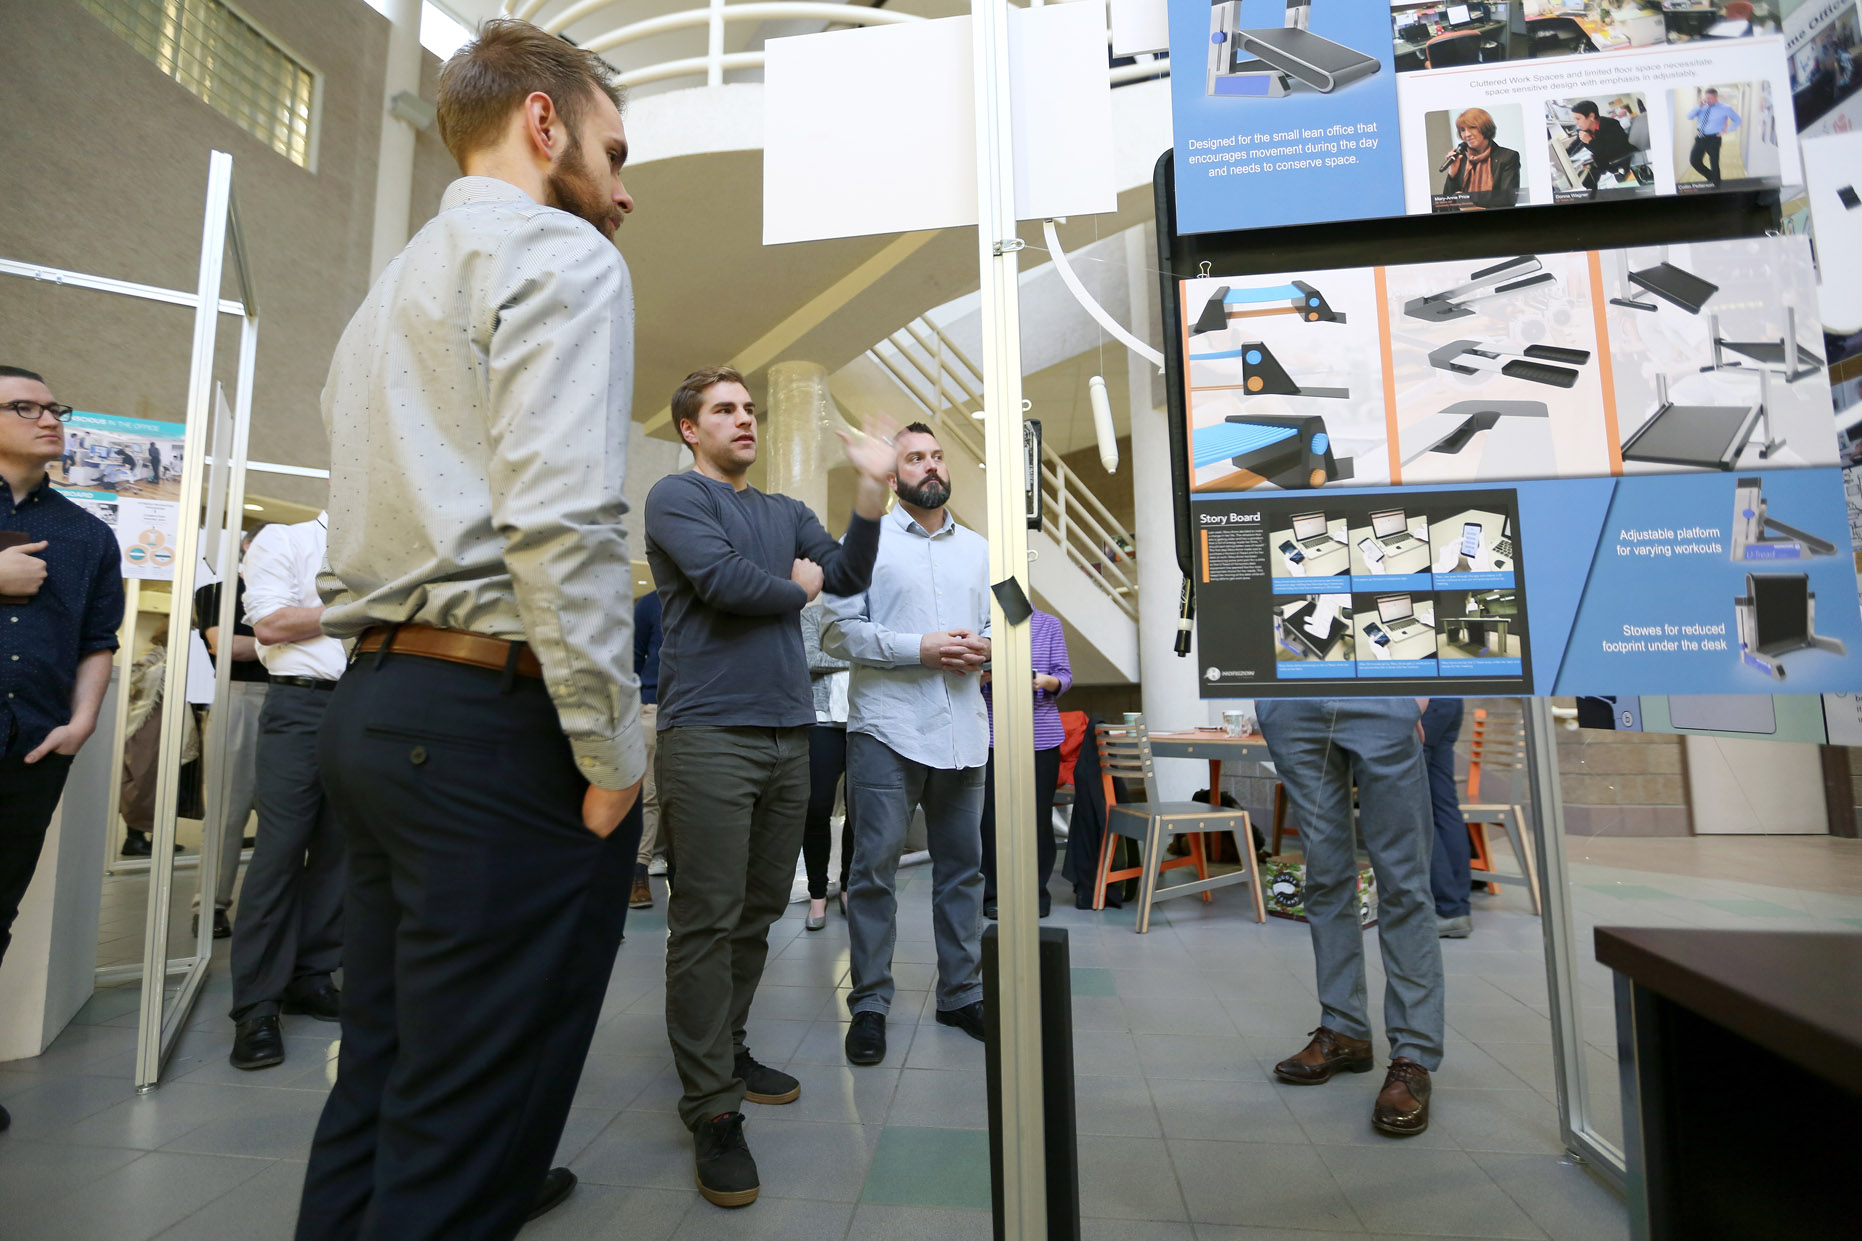 Uw Stout Industrial Design Students Develop Product Ideas For